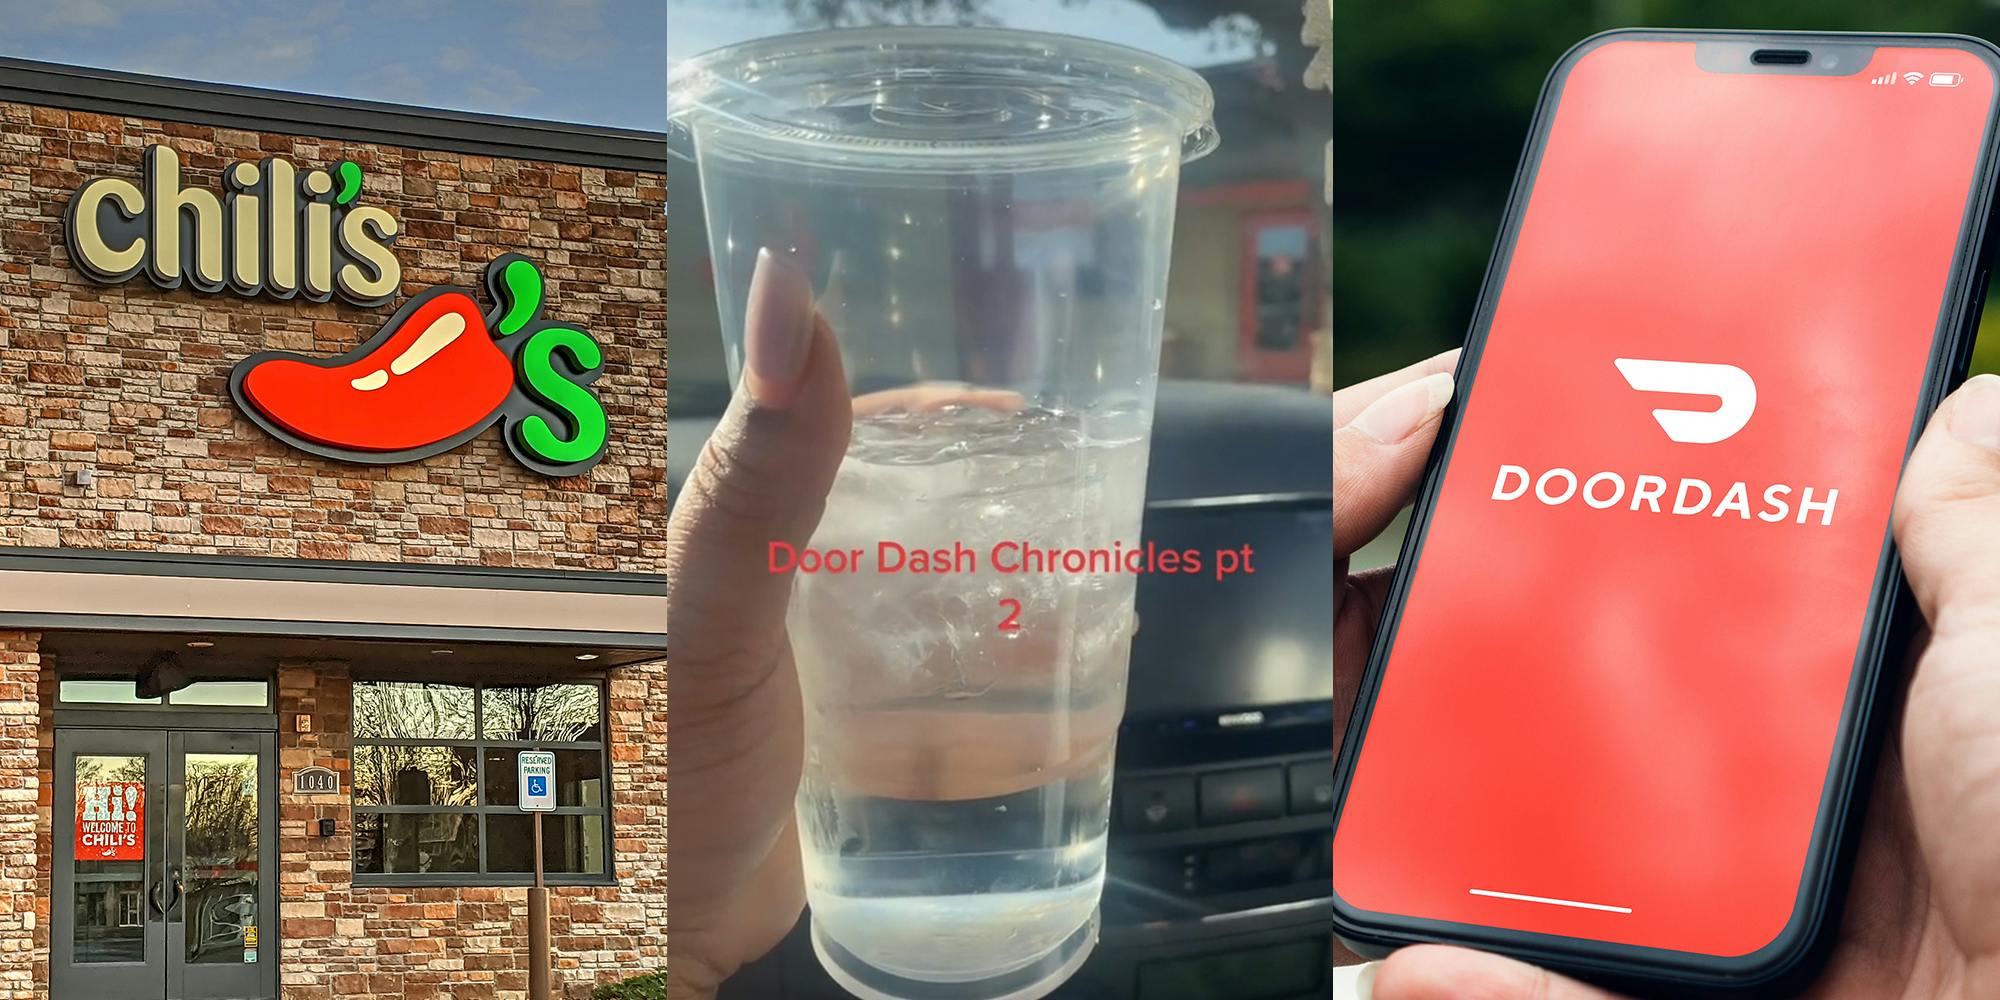 chili's restaurant (l) woman holding cup of water with caption "Door Dash Chronicles pt 2" (c) hands holding phone with Doordash app (r)